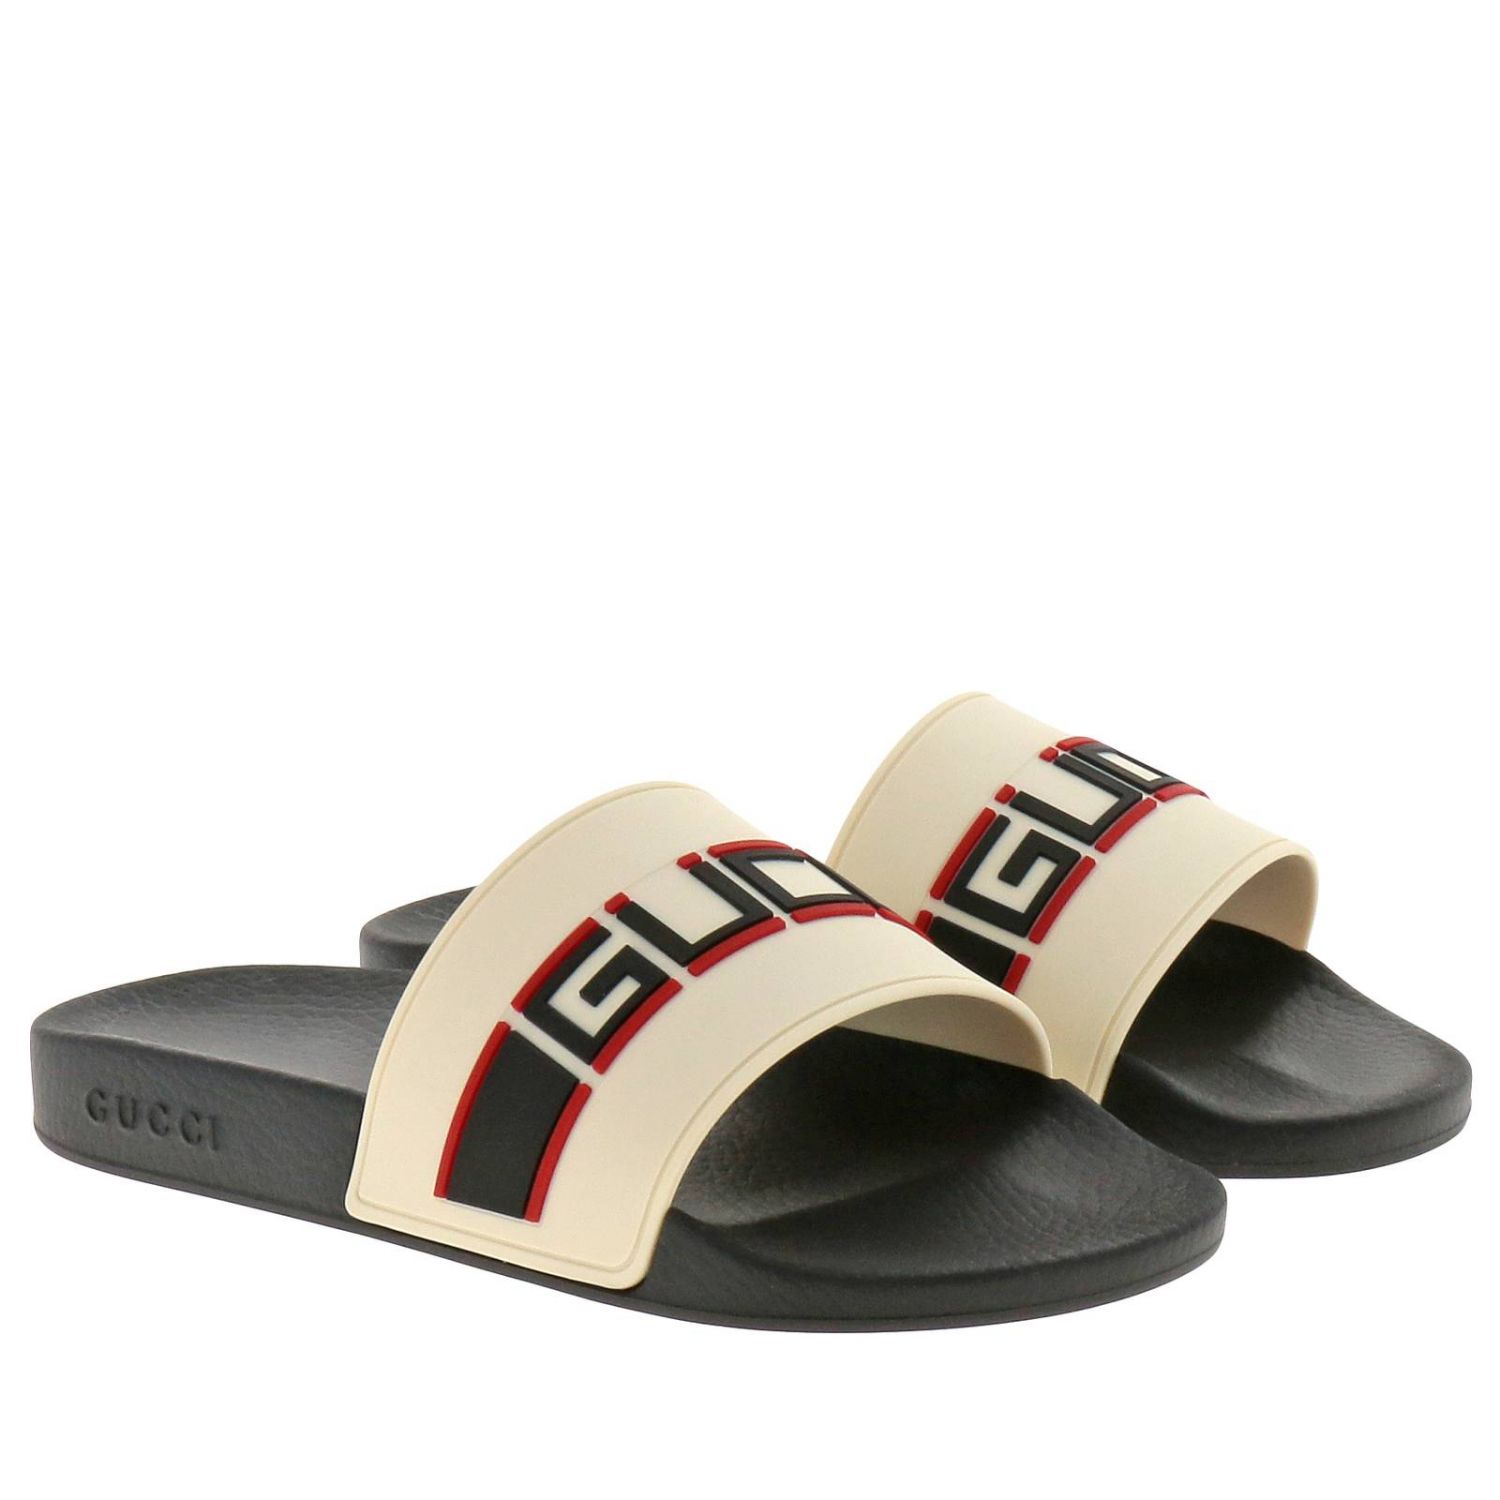 GUCCI: sandals for man - White | Gucci sandals 522884 JC200 online on ...